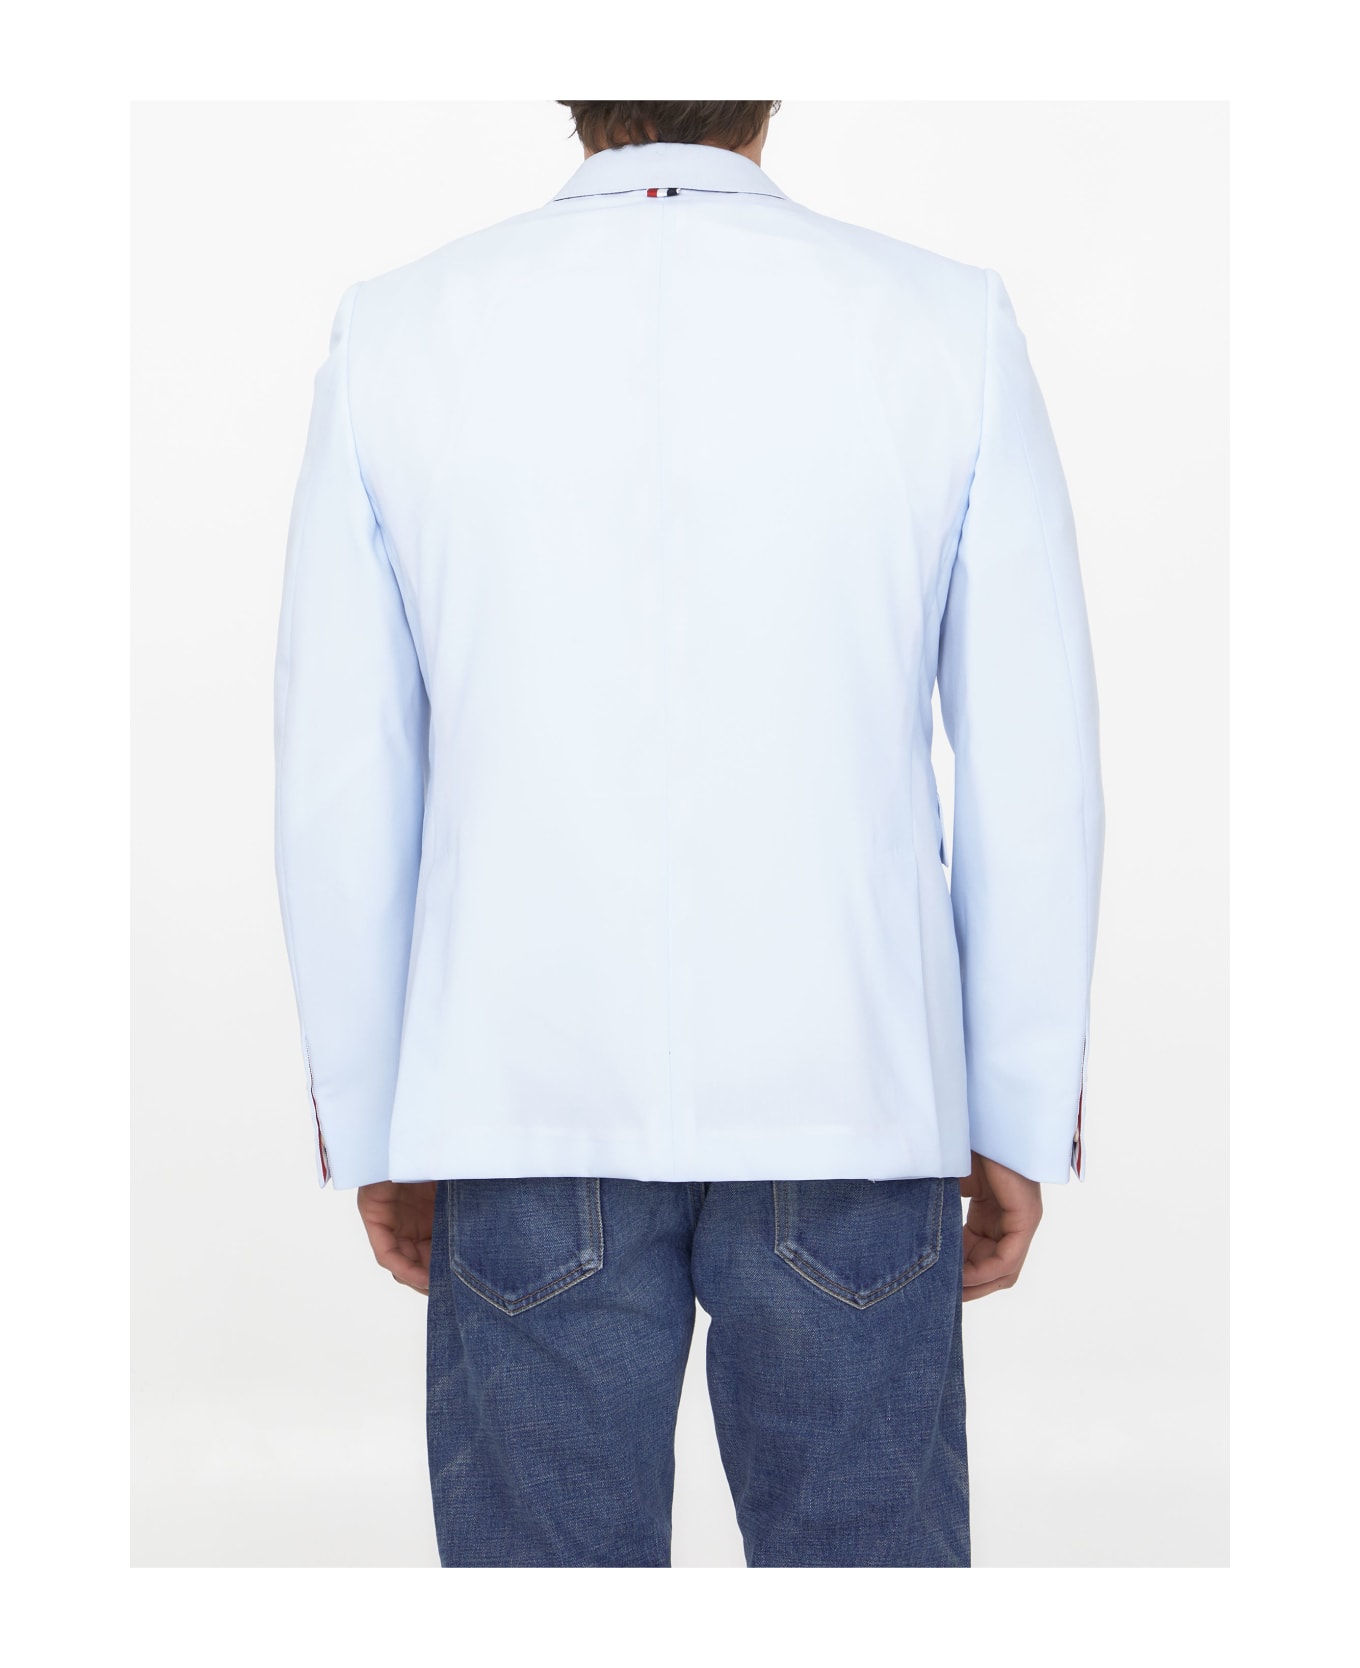 Thom Browne Single-breasted Wool Jacket - LIGHT BLUE ブレザー